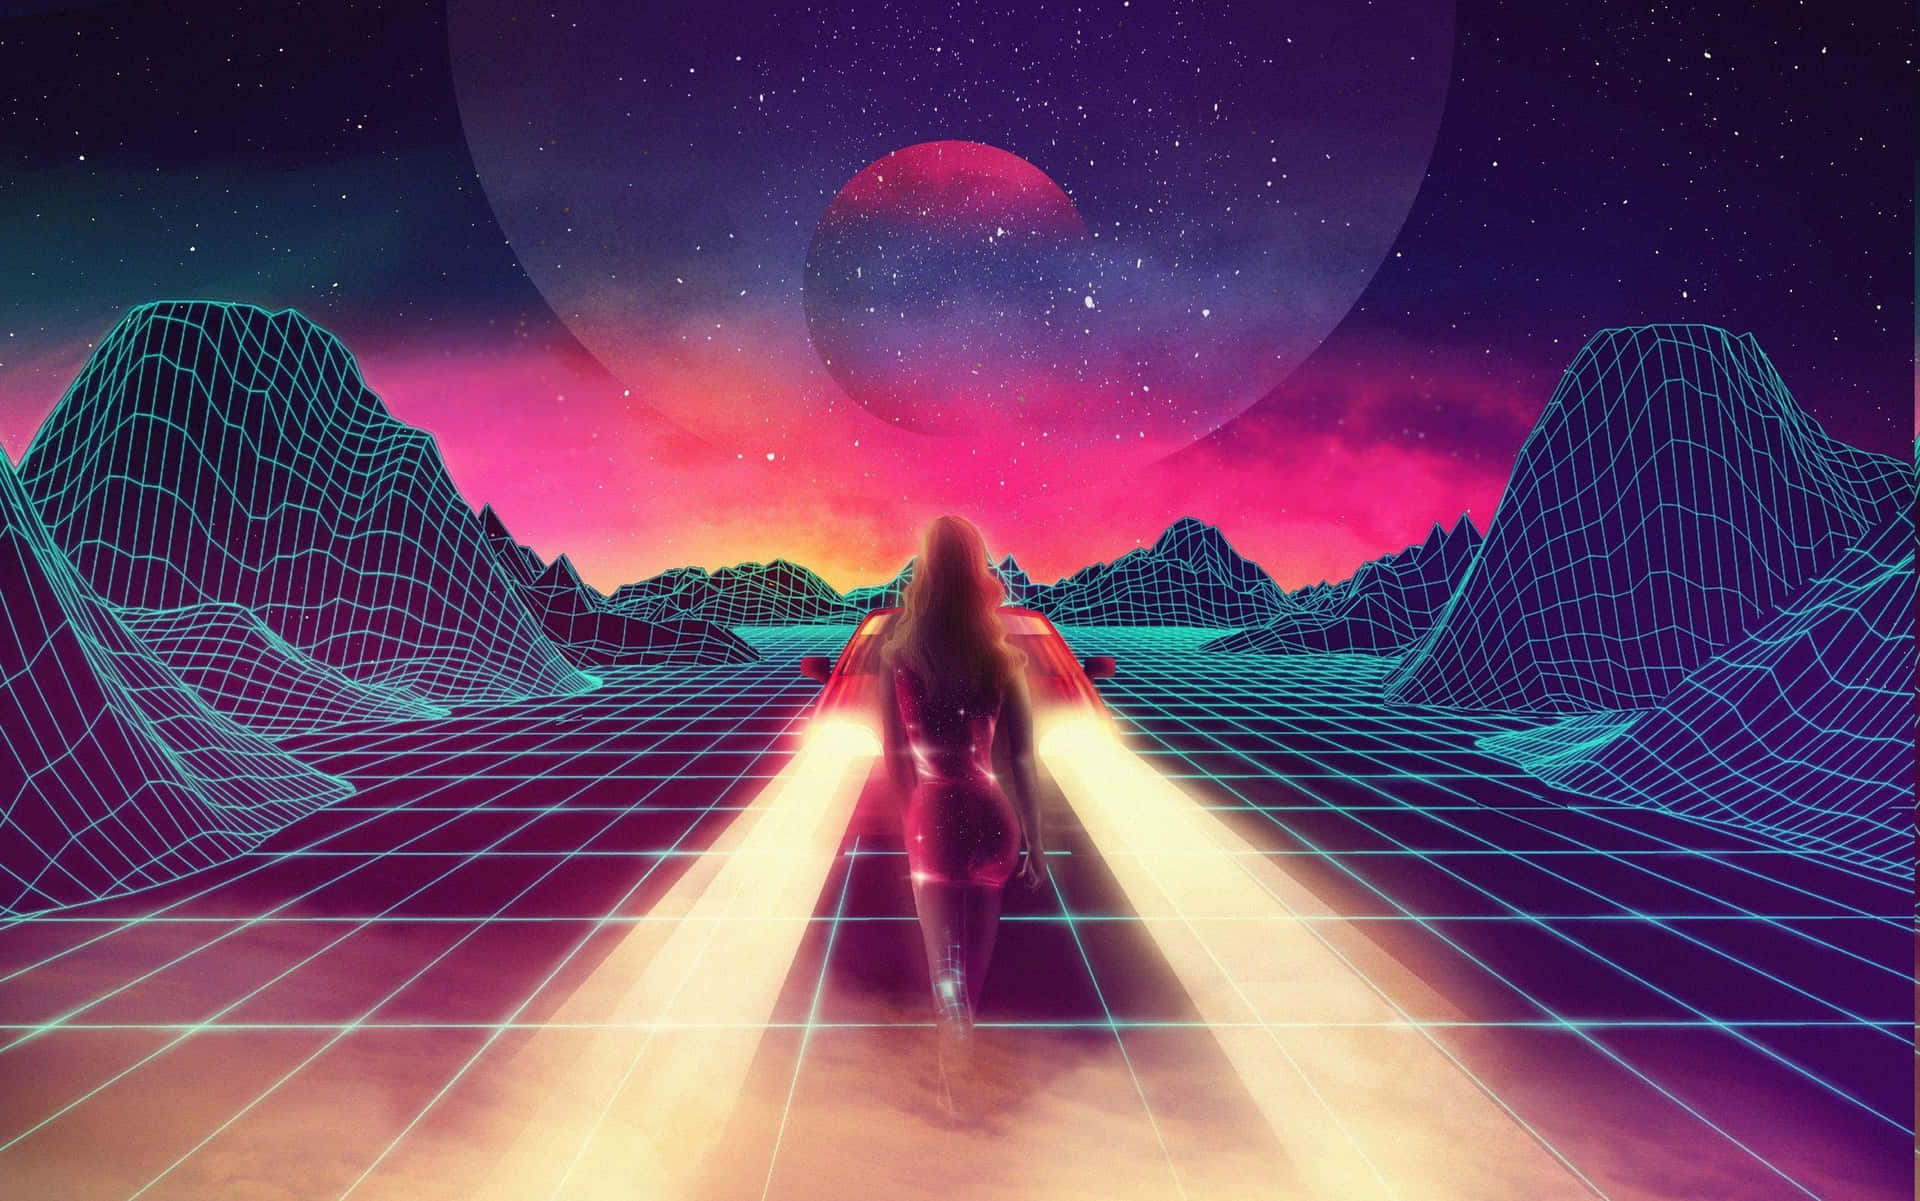 "Enjoy the 80s inspired Synthwave vibes"